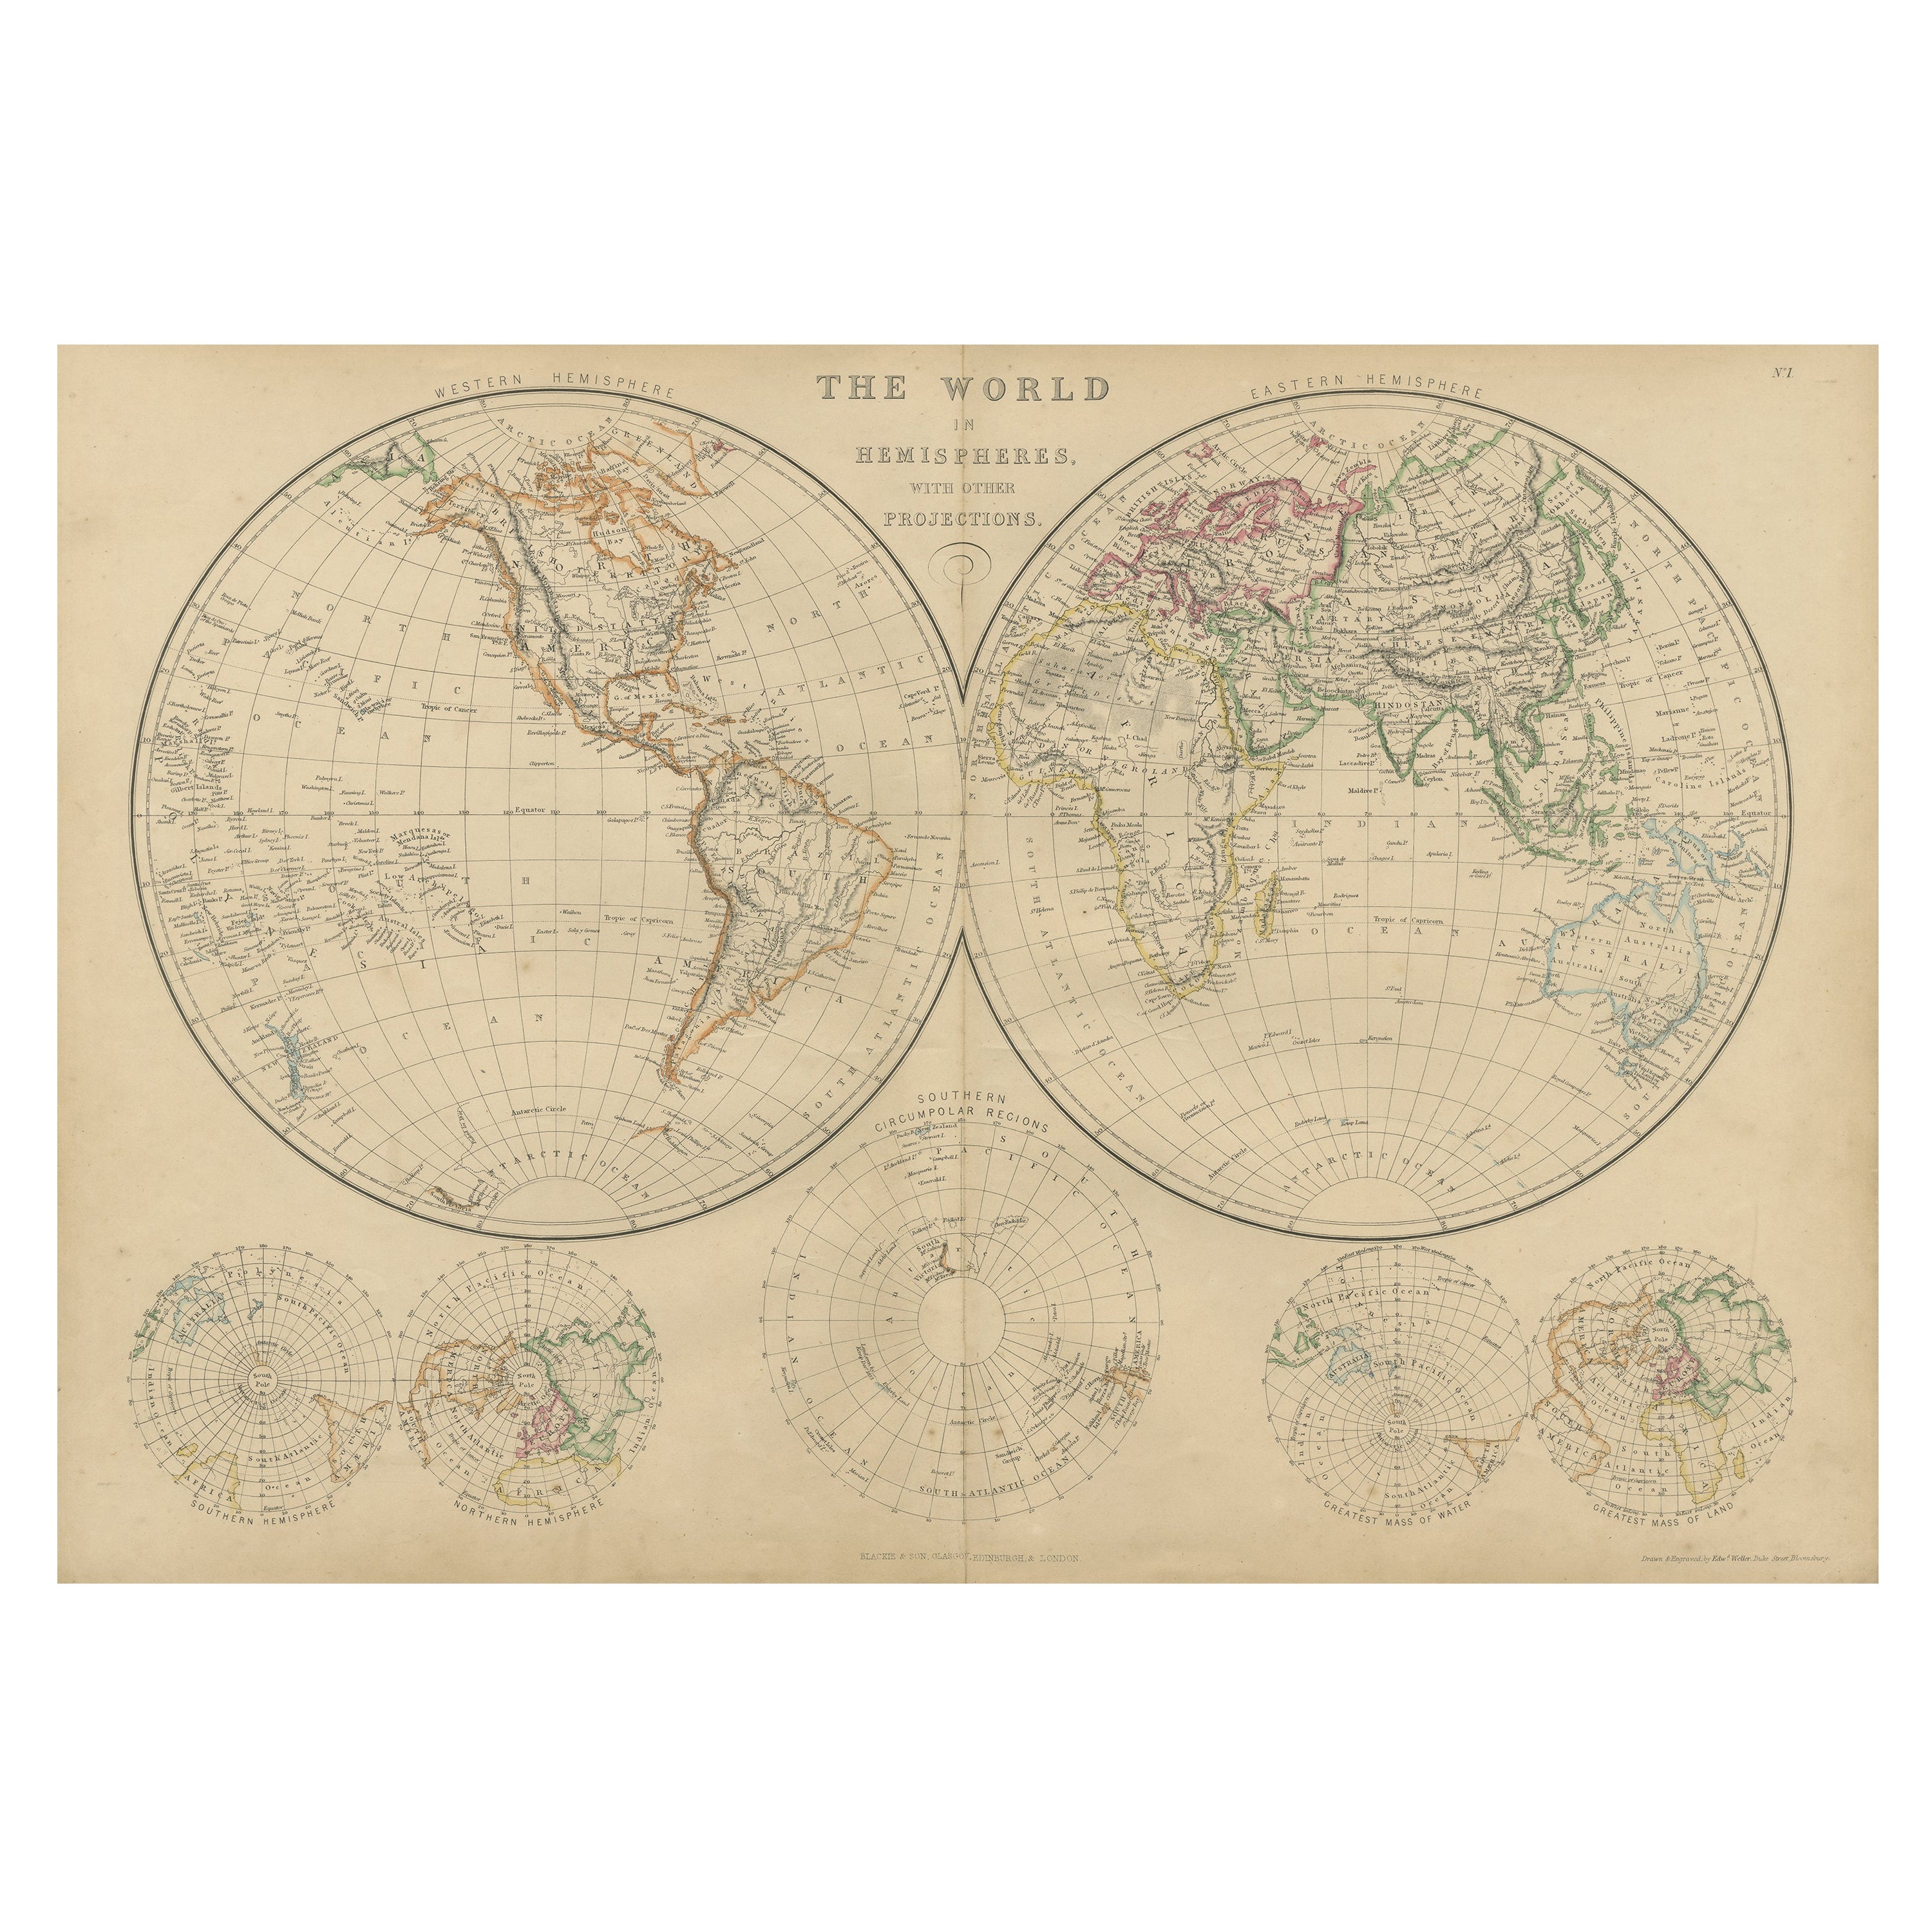 Antique Map of The World in Hemispheres by W. G. Blackie, 1859